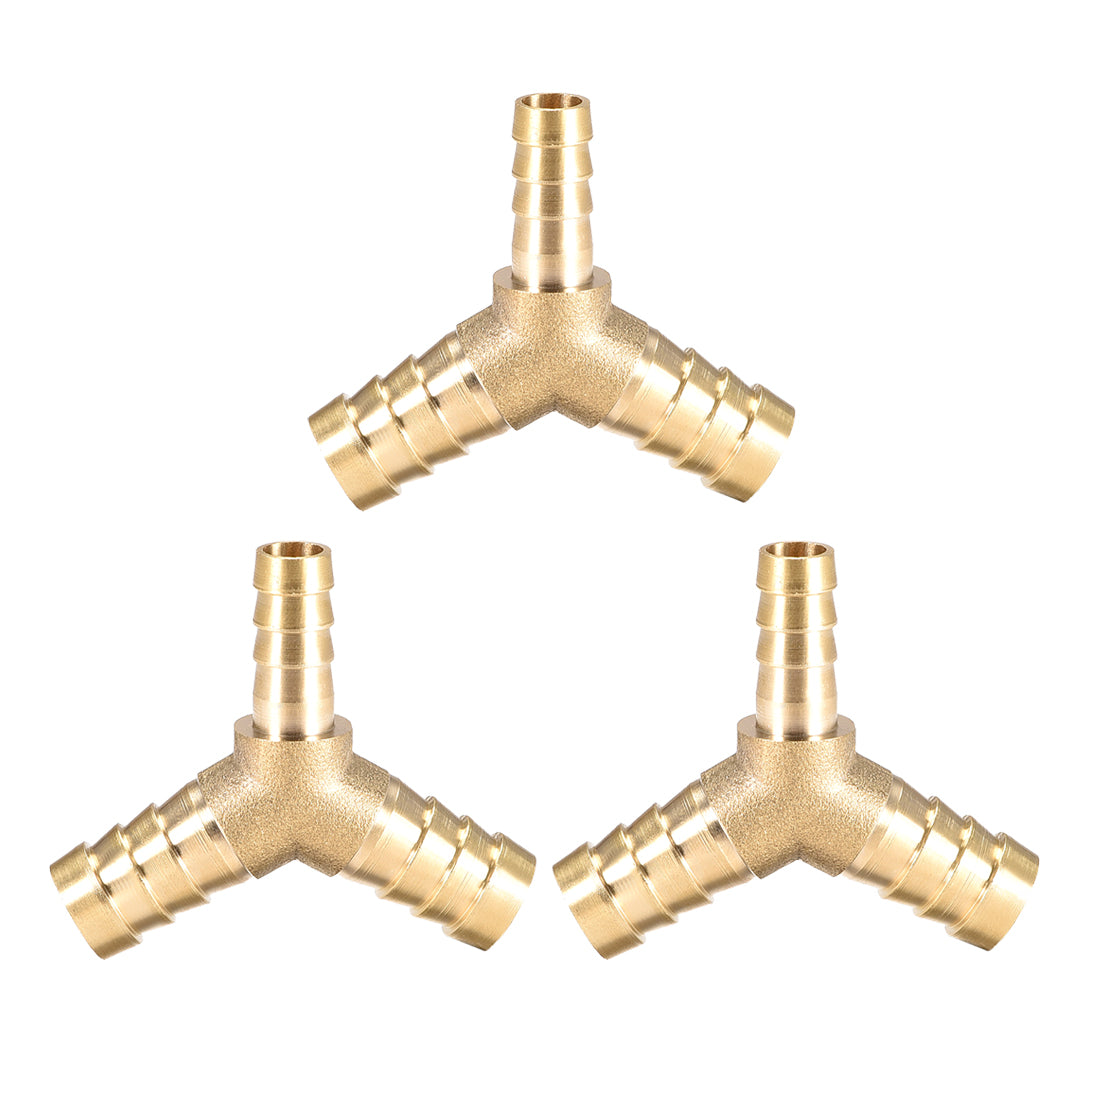 Uxcell Uxcell 8mm x 6mm x 8mm Hose ID Brass Reducer Barb Fitting Y-Shaped 3 Way Tee Connector Adapter 3pcs